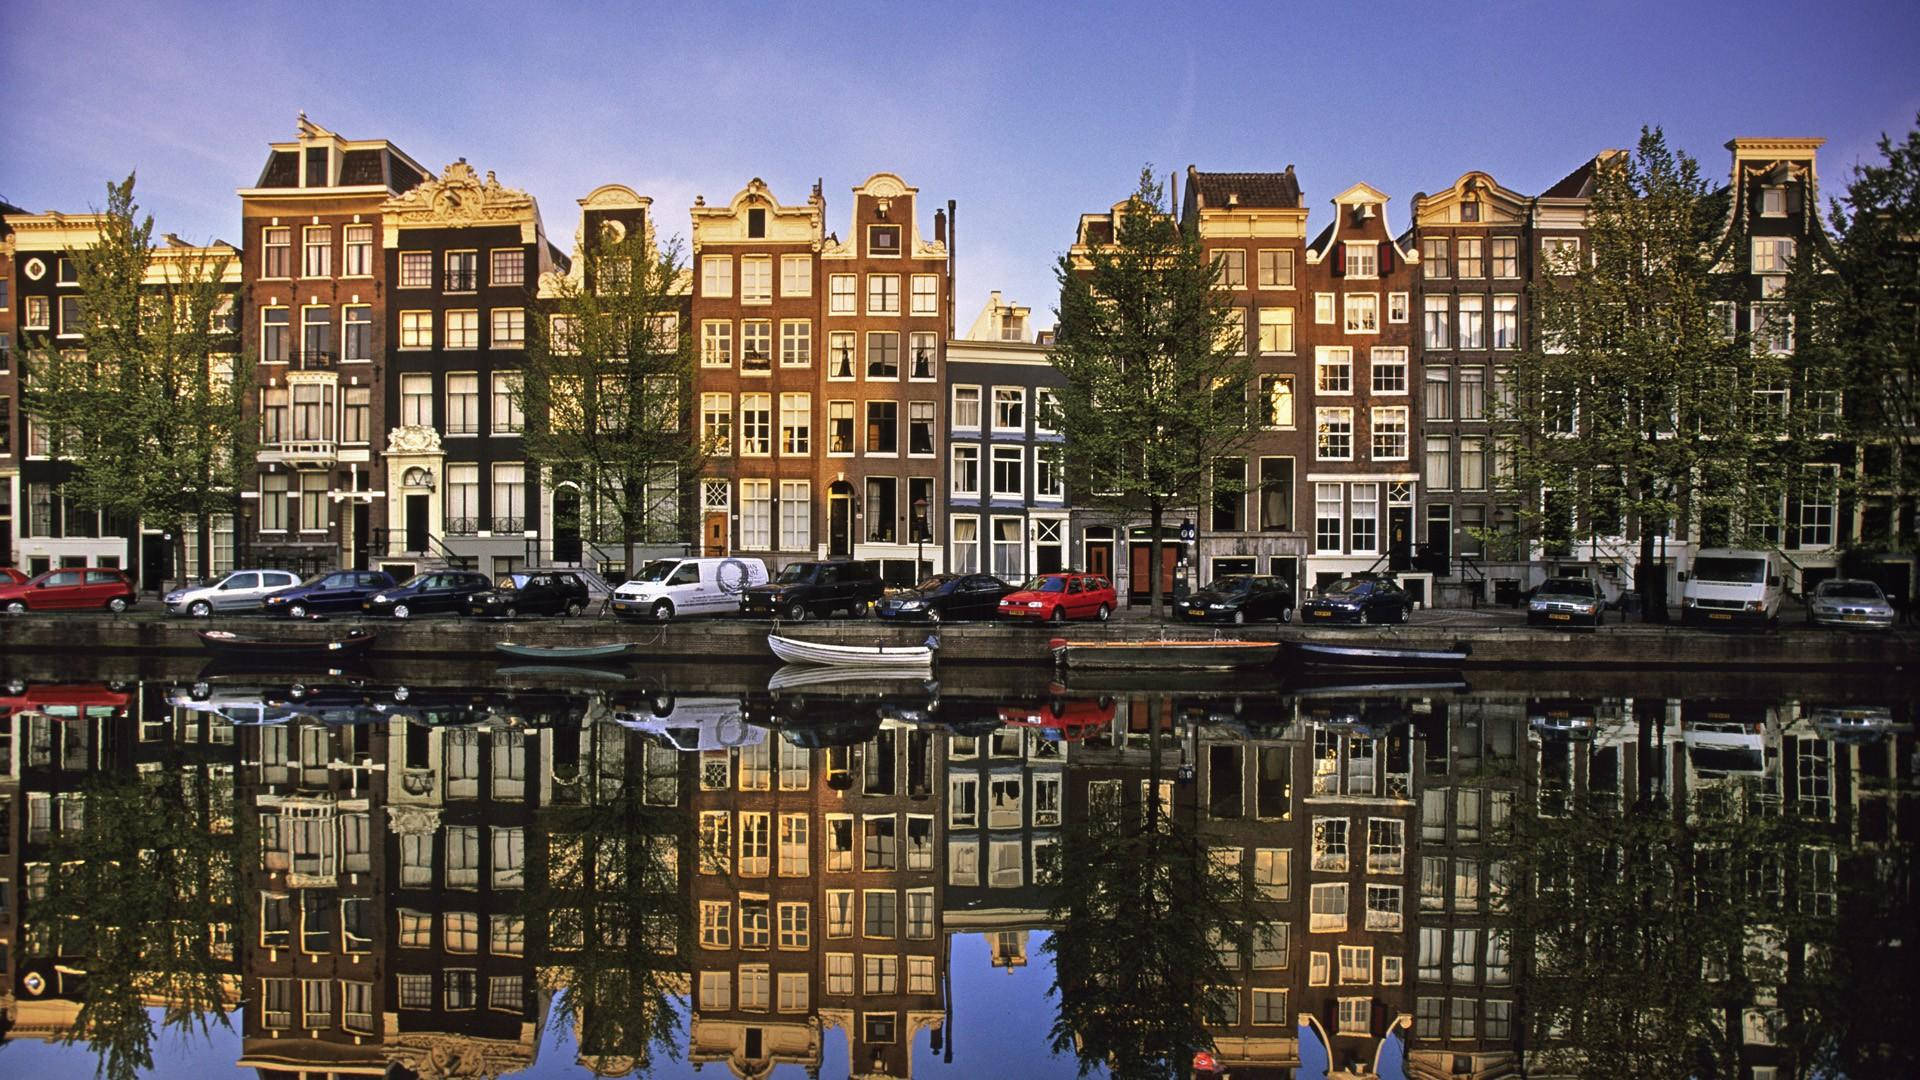 Aesthetic Amsterdam Canal House Picture